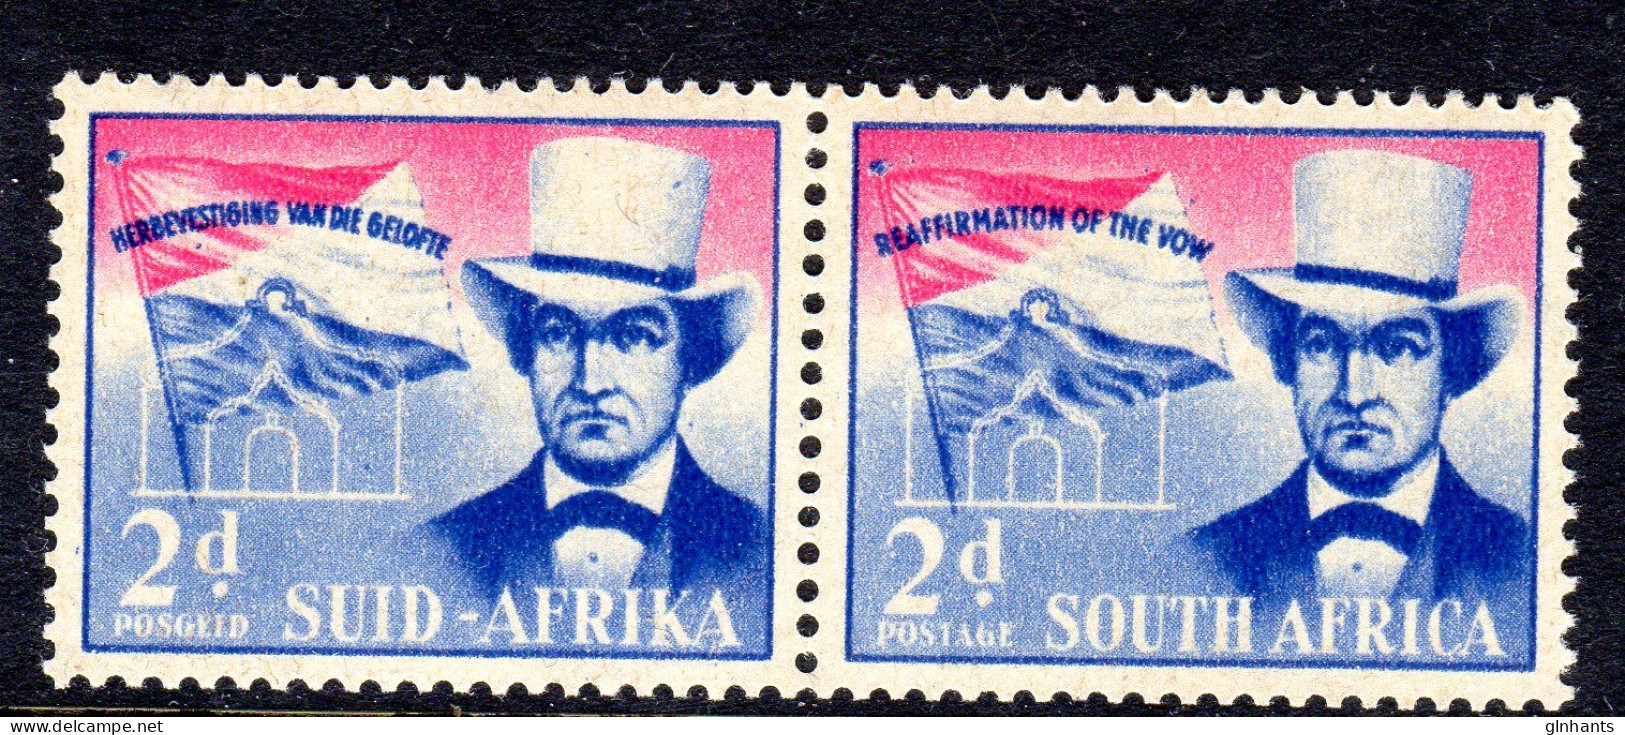 SOUTH AFRICA - 1955 VOORTREKKER COVENANT STAMP PAIR FINE LIGHTLY MOUNTED MINT LMM * SG 167 - Neufs